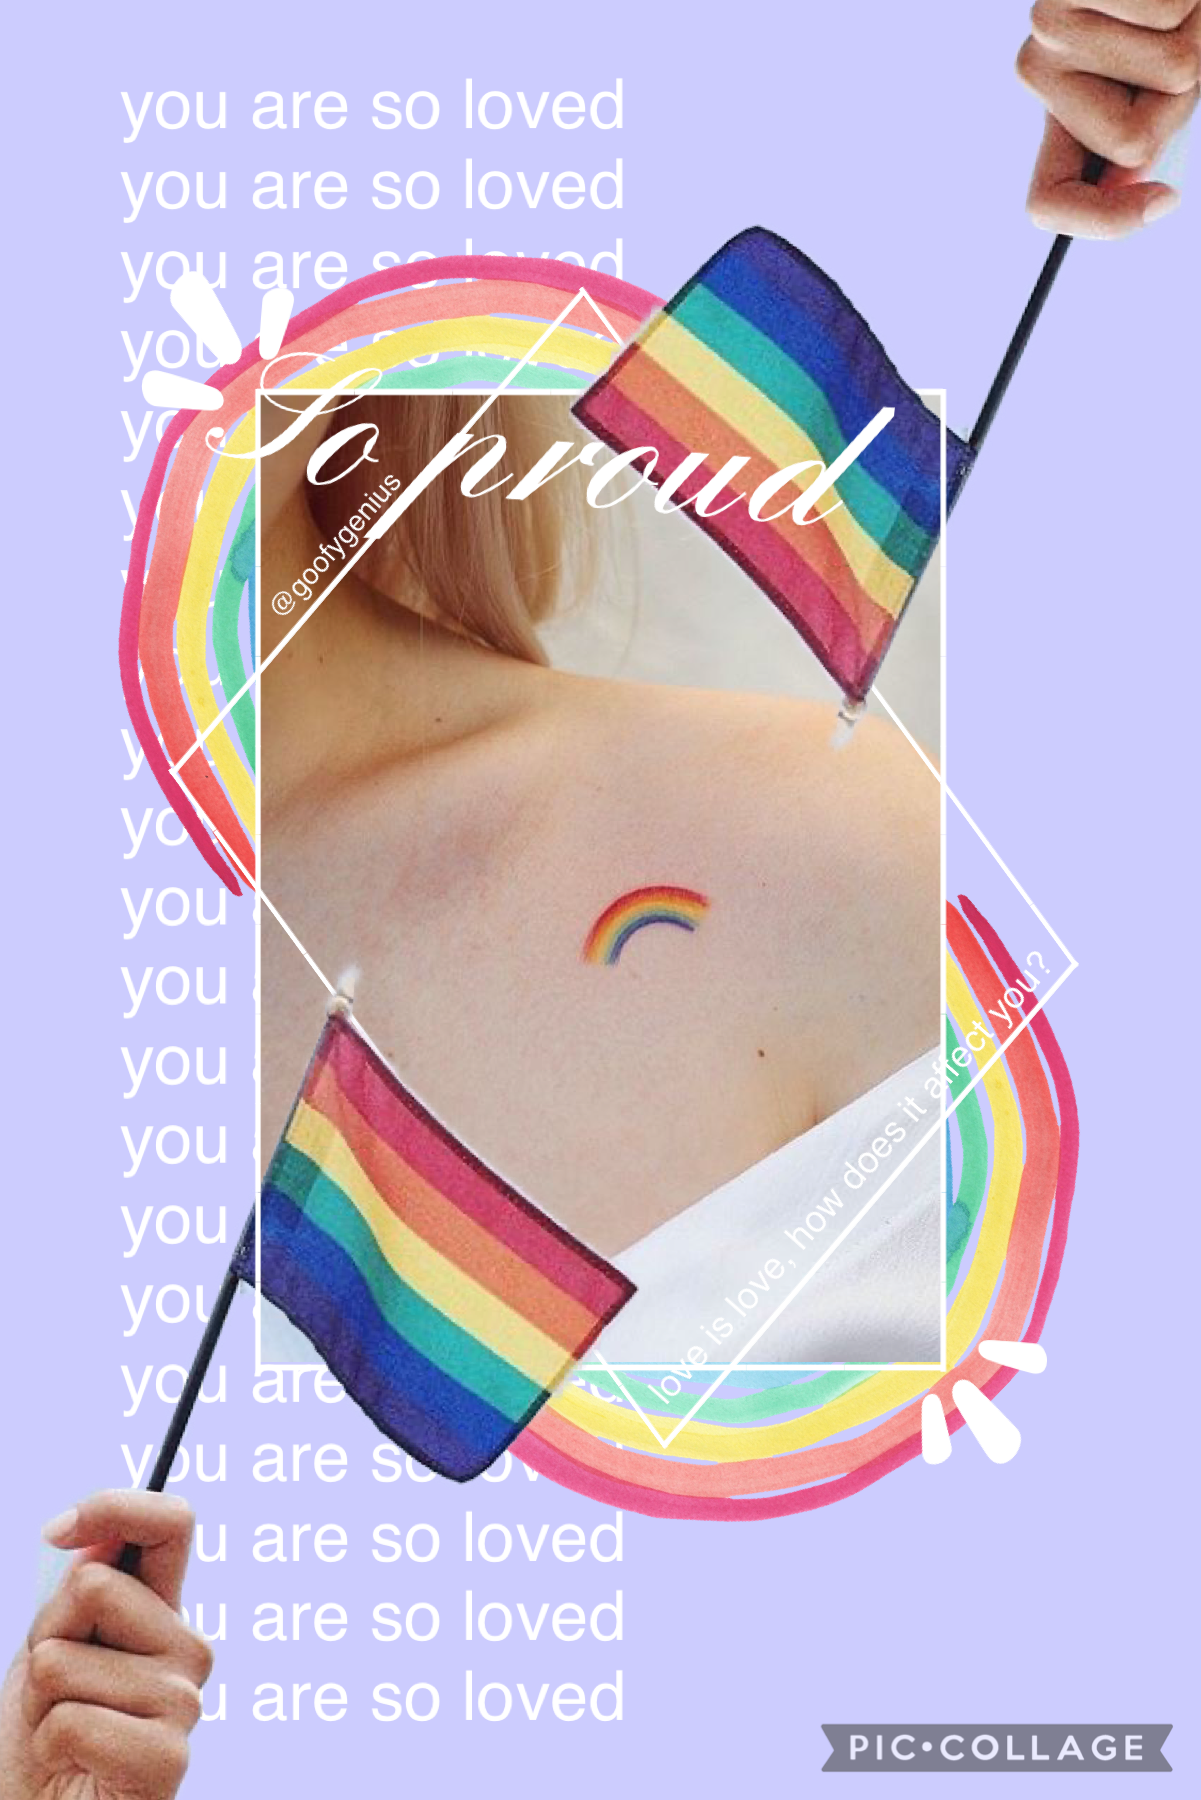 🏳️‍🌈Tap Here🏳️‍🌈 [read caption for full]
A lot of things to cover here. 
1. Thank you so much for all the love on my last post, and I’m comforted to hear many share my same experiences. ✨ I started responding to comments, but then would get side tracked. 